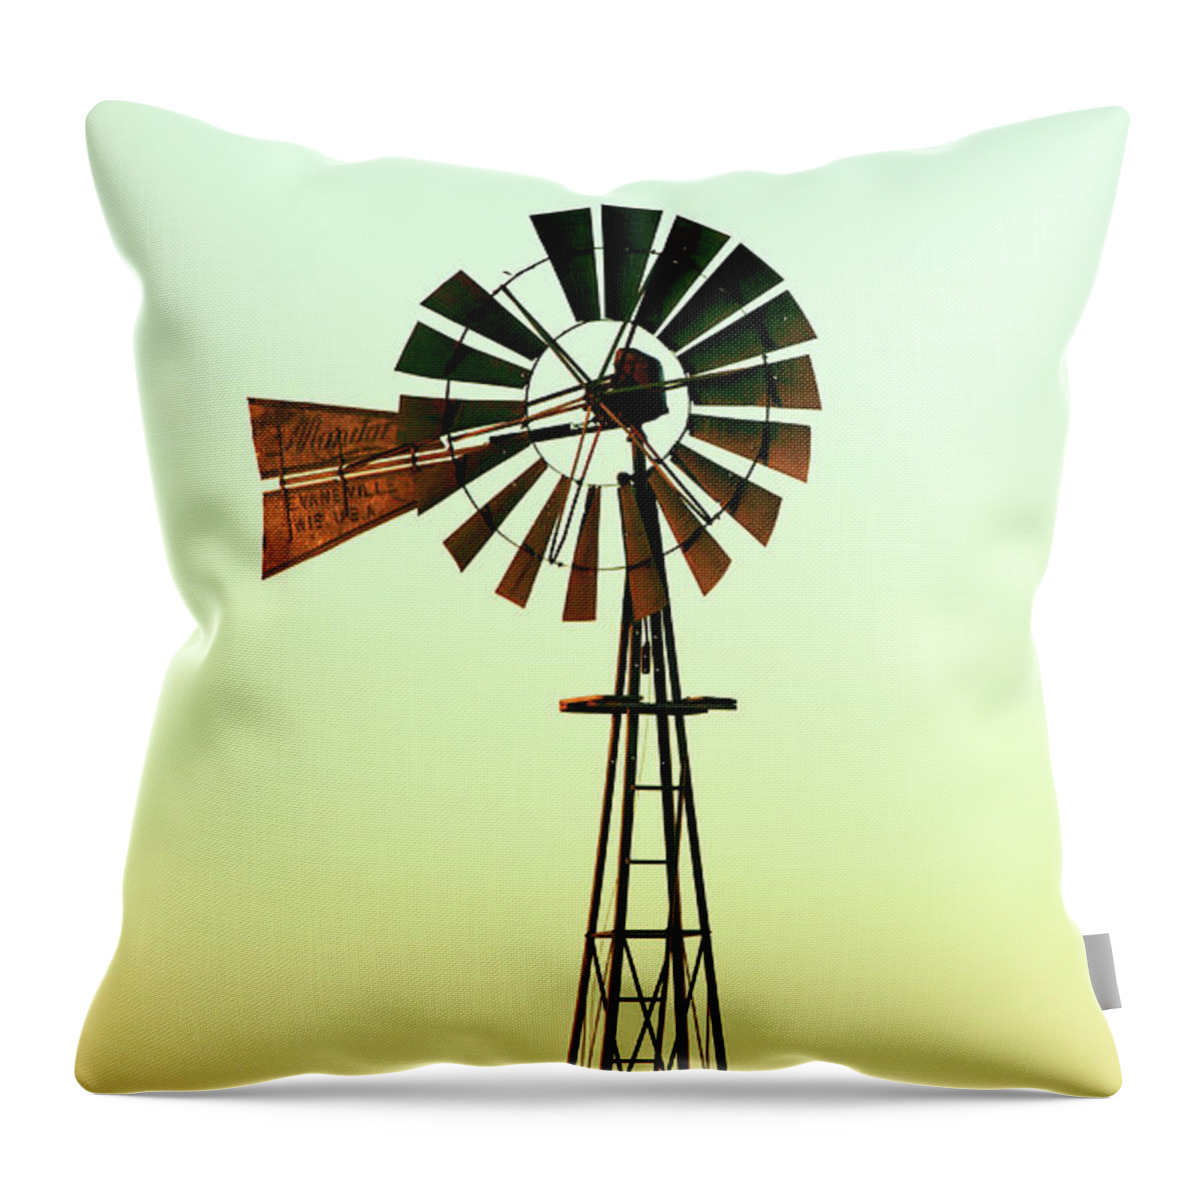 Windmill Throw Pillow featuring the photograph Winmill Tint by Todd Klassy